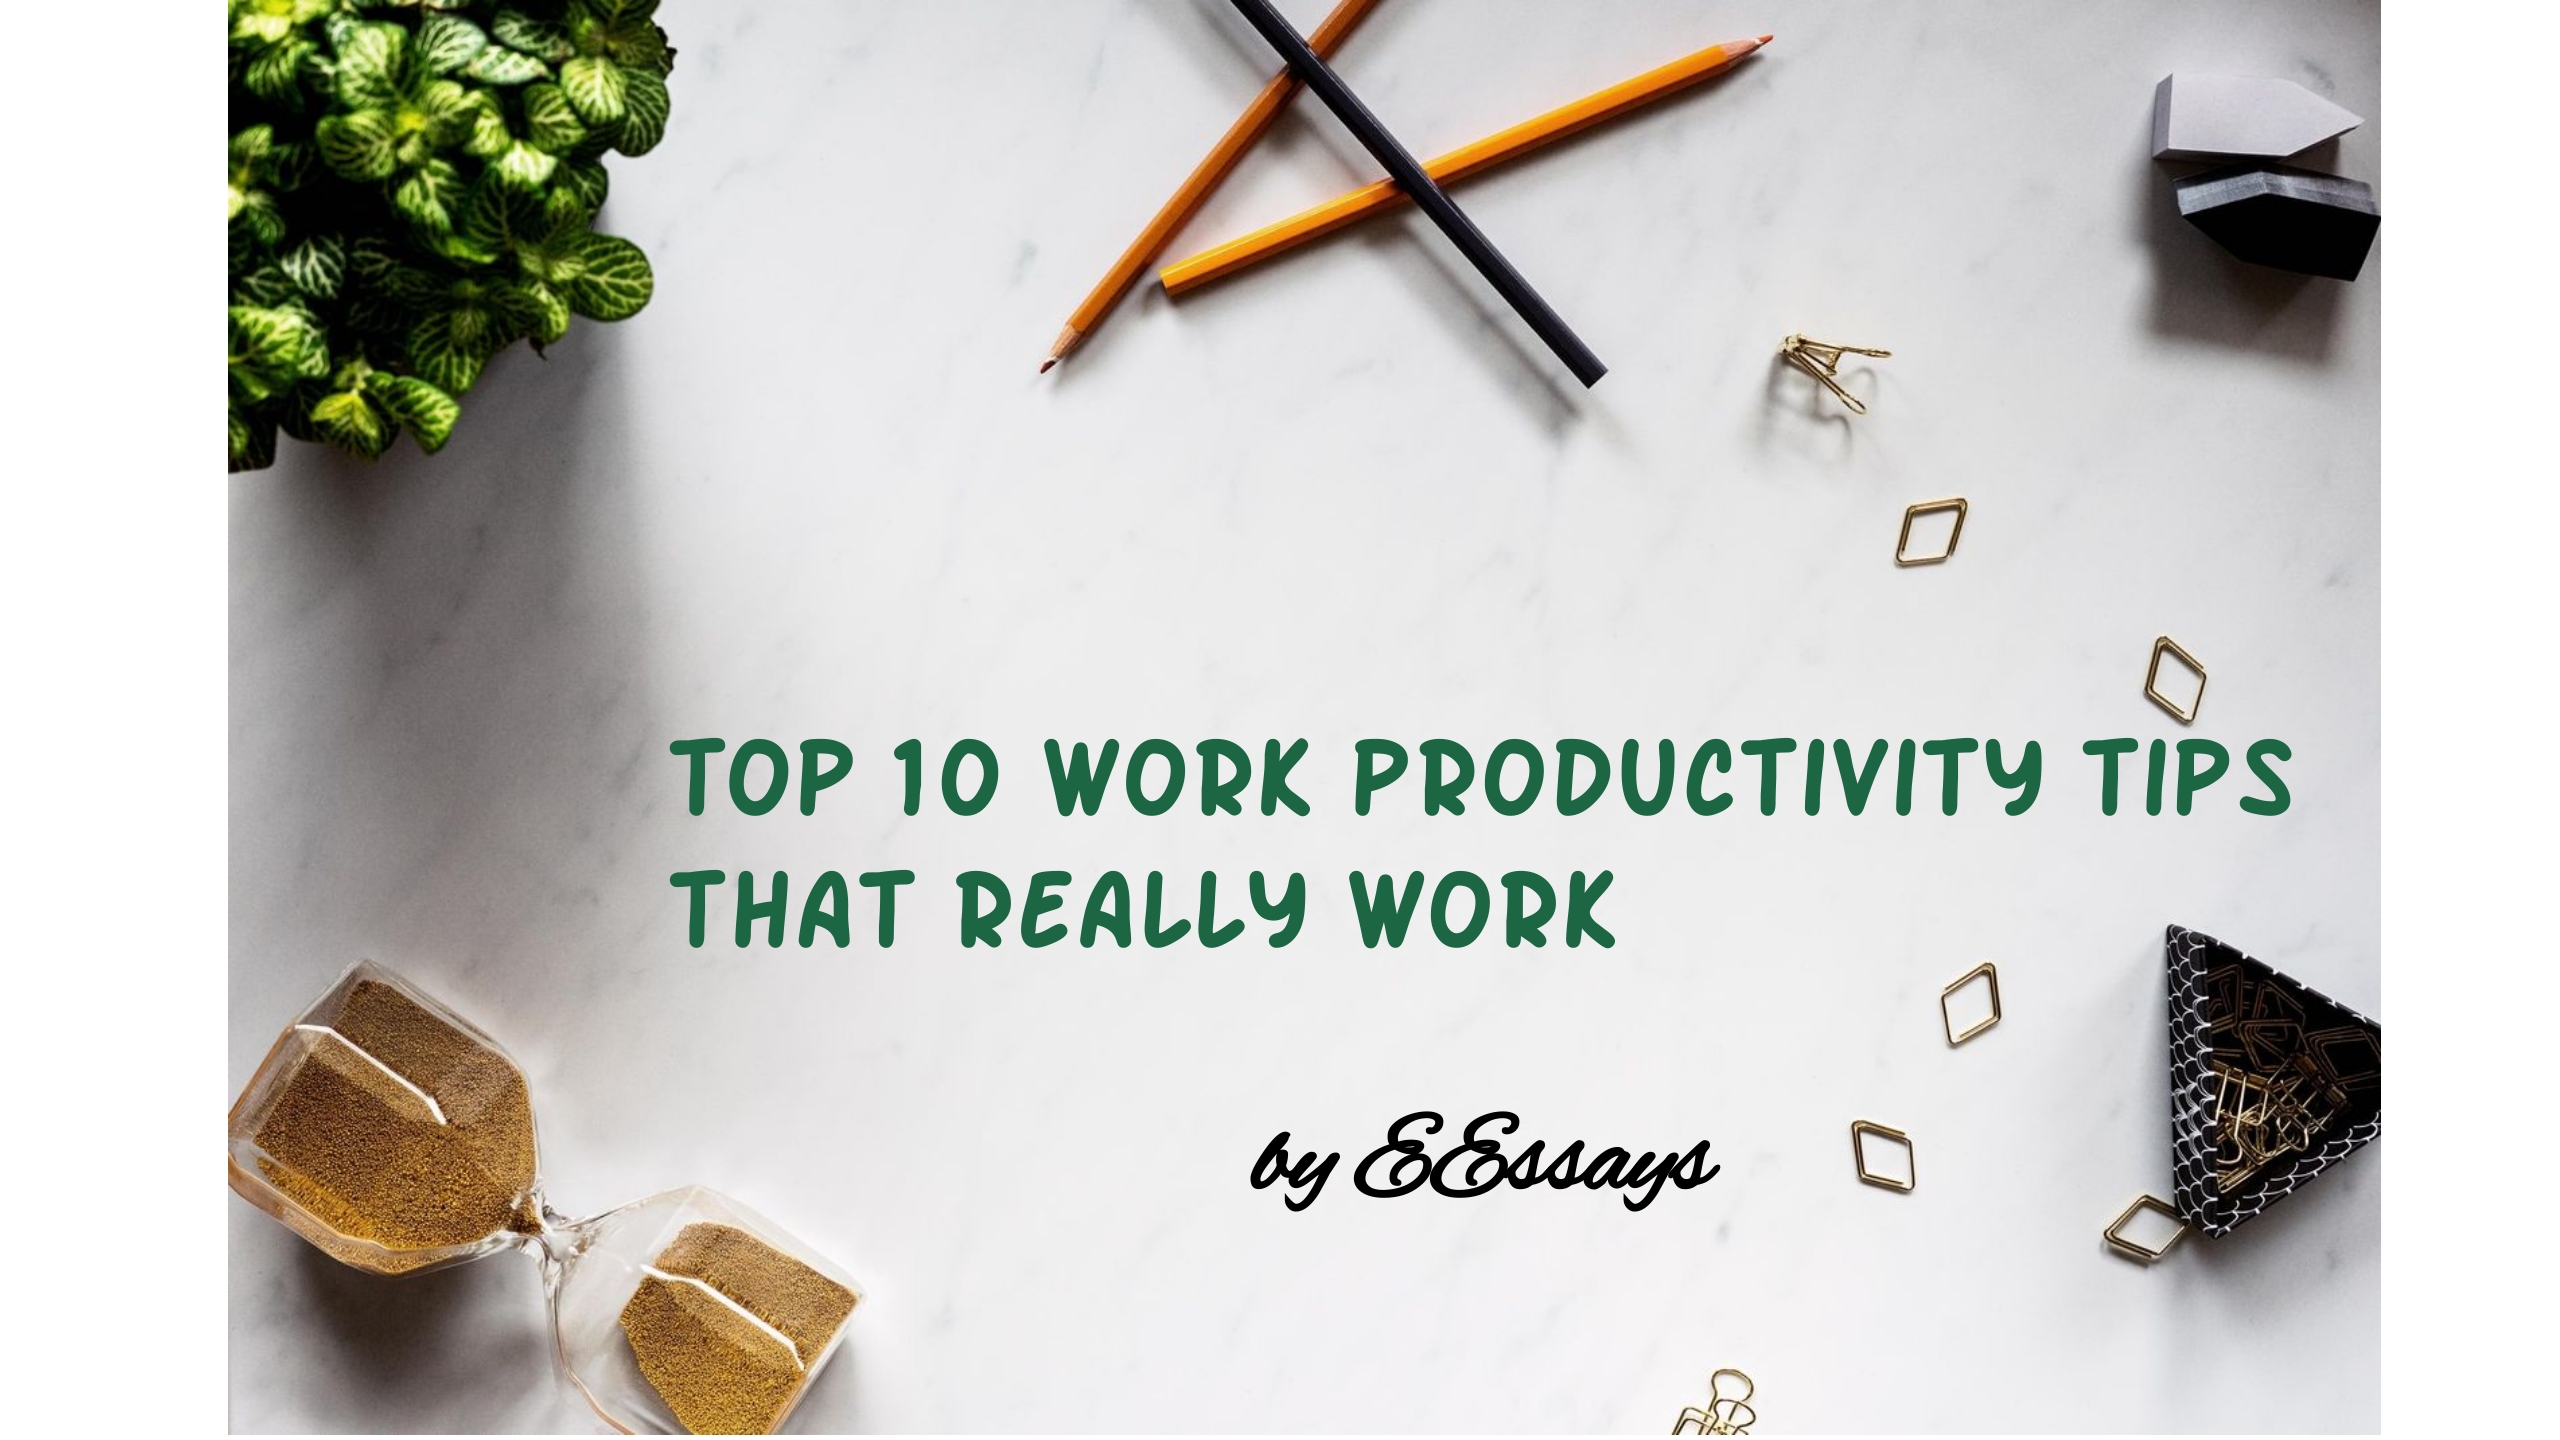 Productivity Tips for Work: Top 10 Ways to Be More Productive